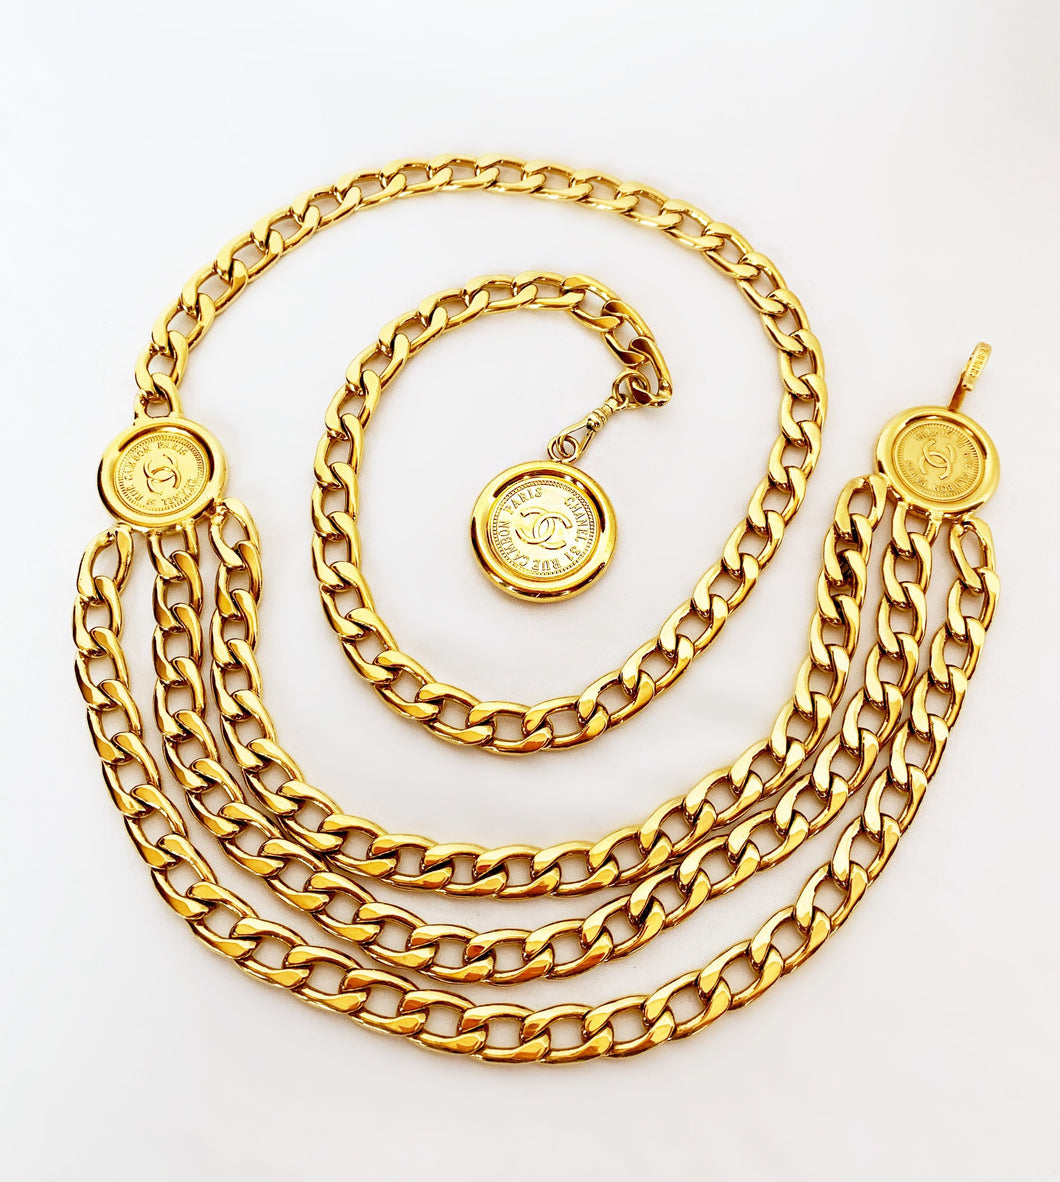 CHANEL 3 LAYERED BELT NECKLACE WITH 3 MEDALLION COINS